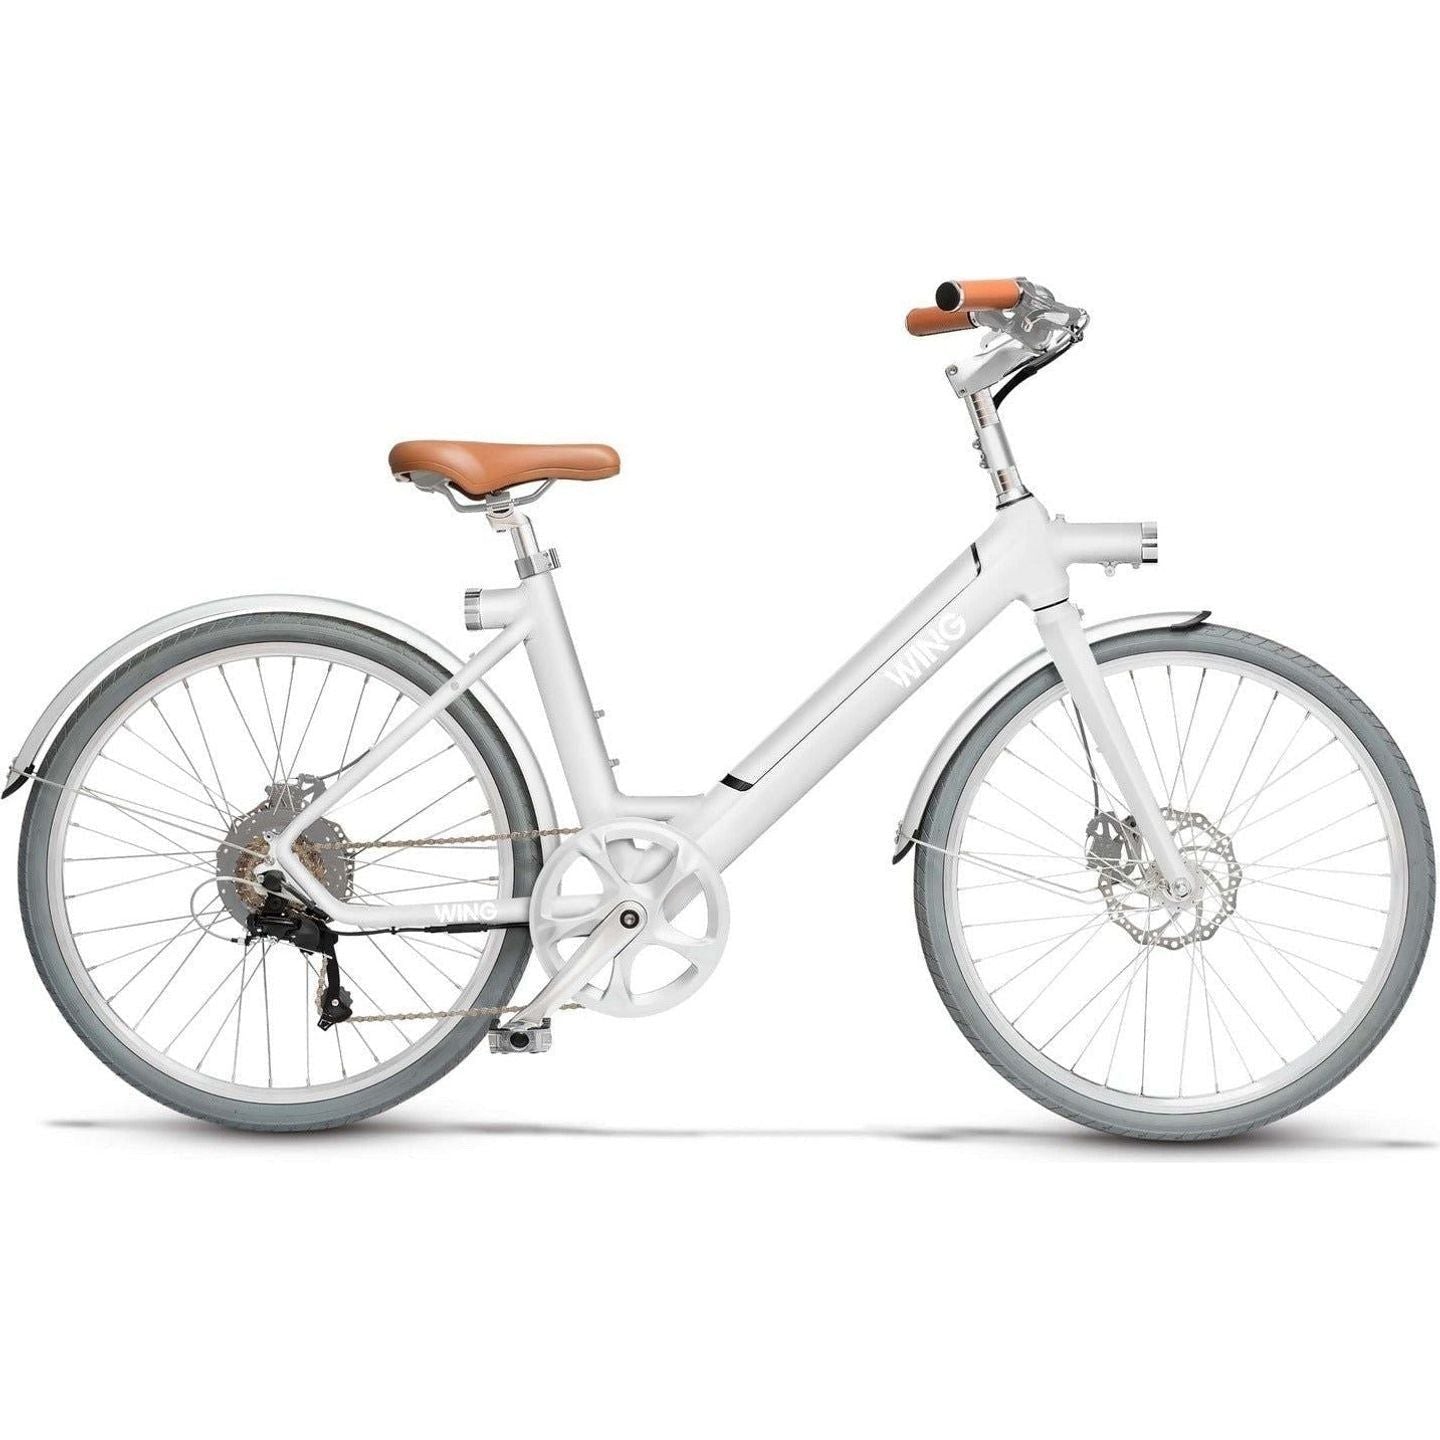 Wing Bikes Bicycles 14ah (Up to 60 miles) / Silver Wing Freedom ST